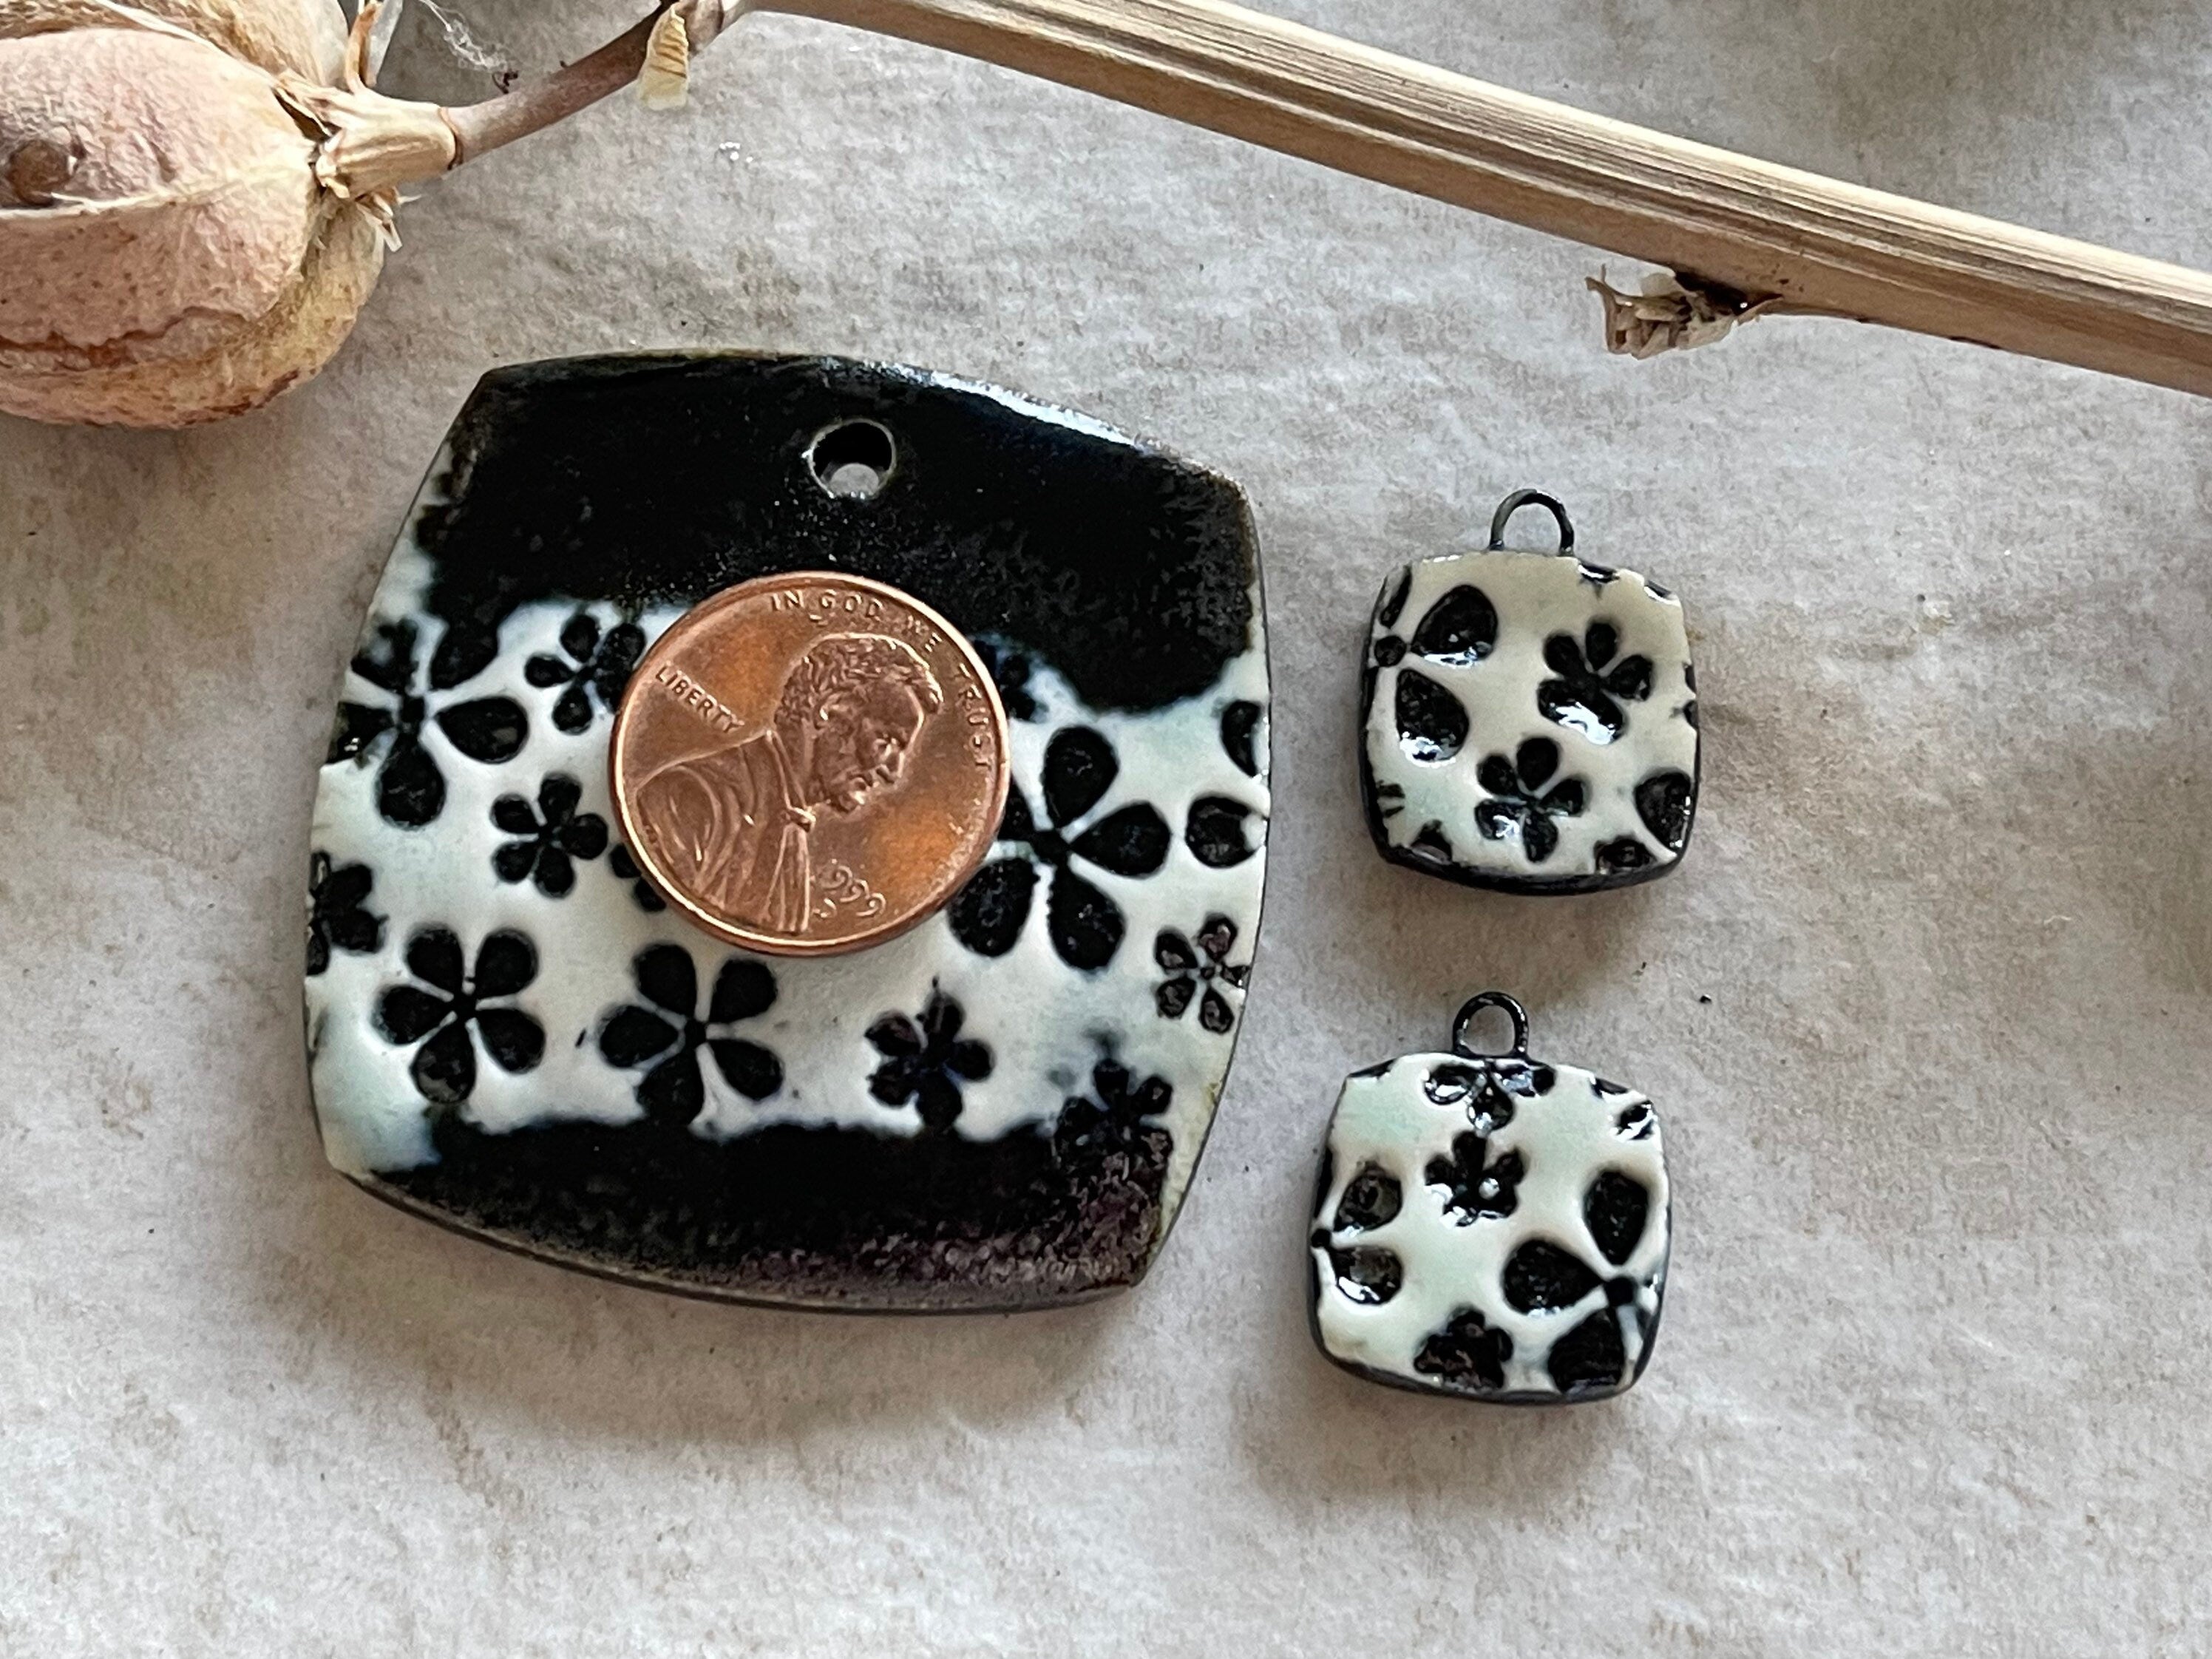 Black and white Flower Pendant and Charms, Pendant, Obtuse Square, Porcelain Ceramic Pendant, Artisan Pendant, Jewelry Making Components